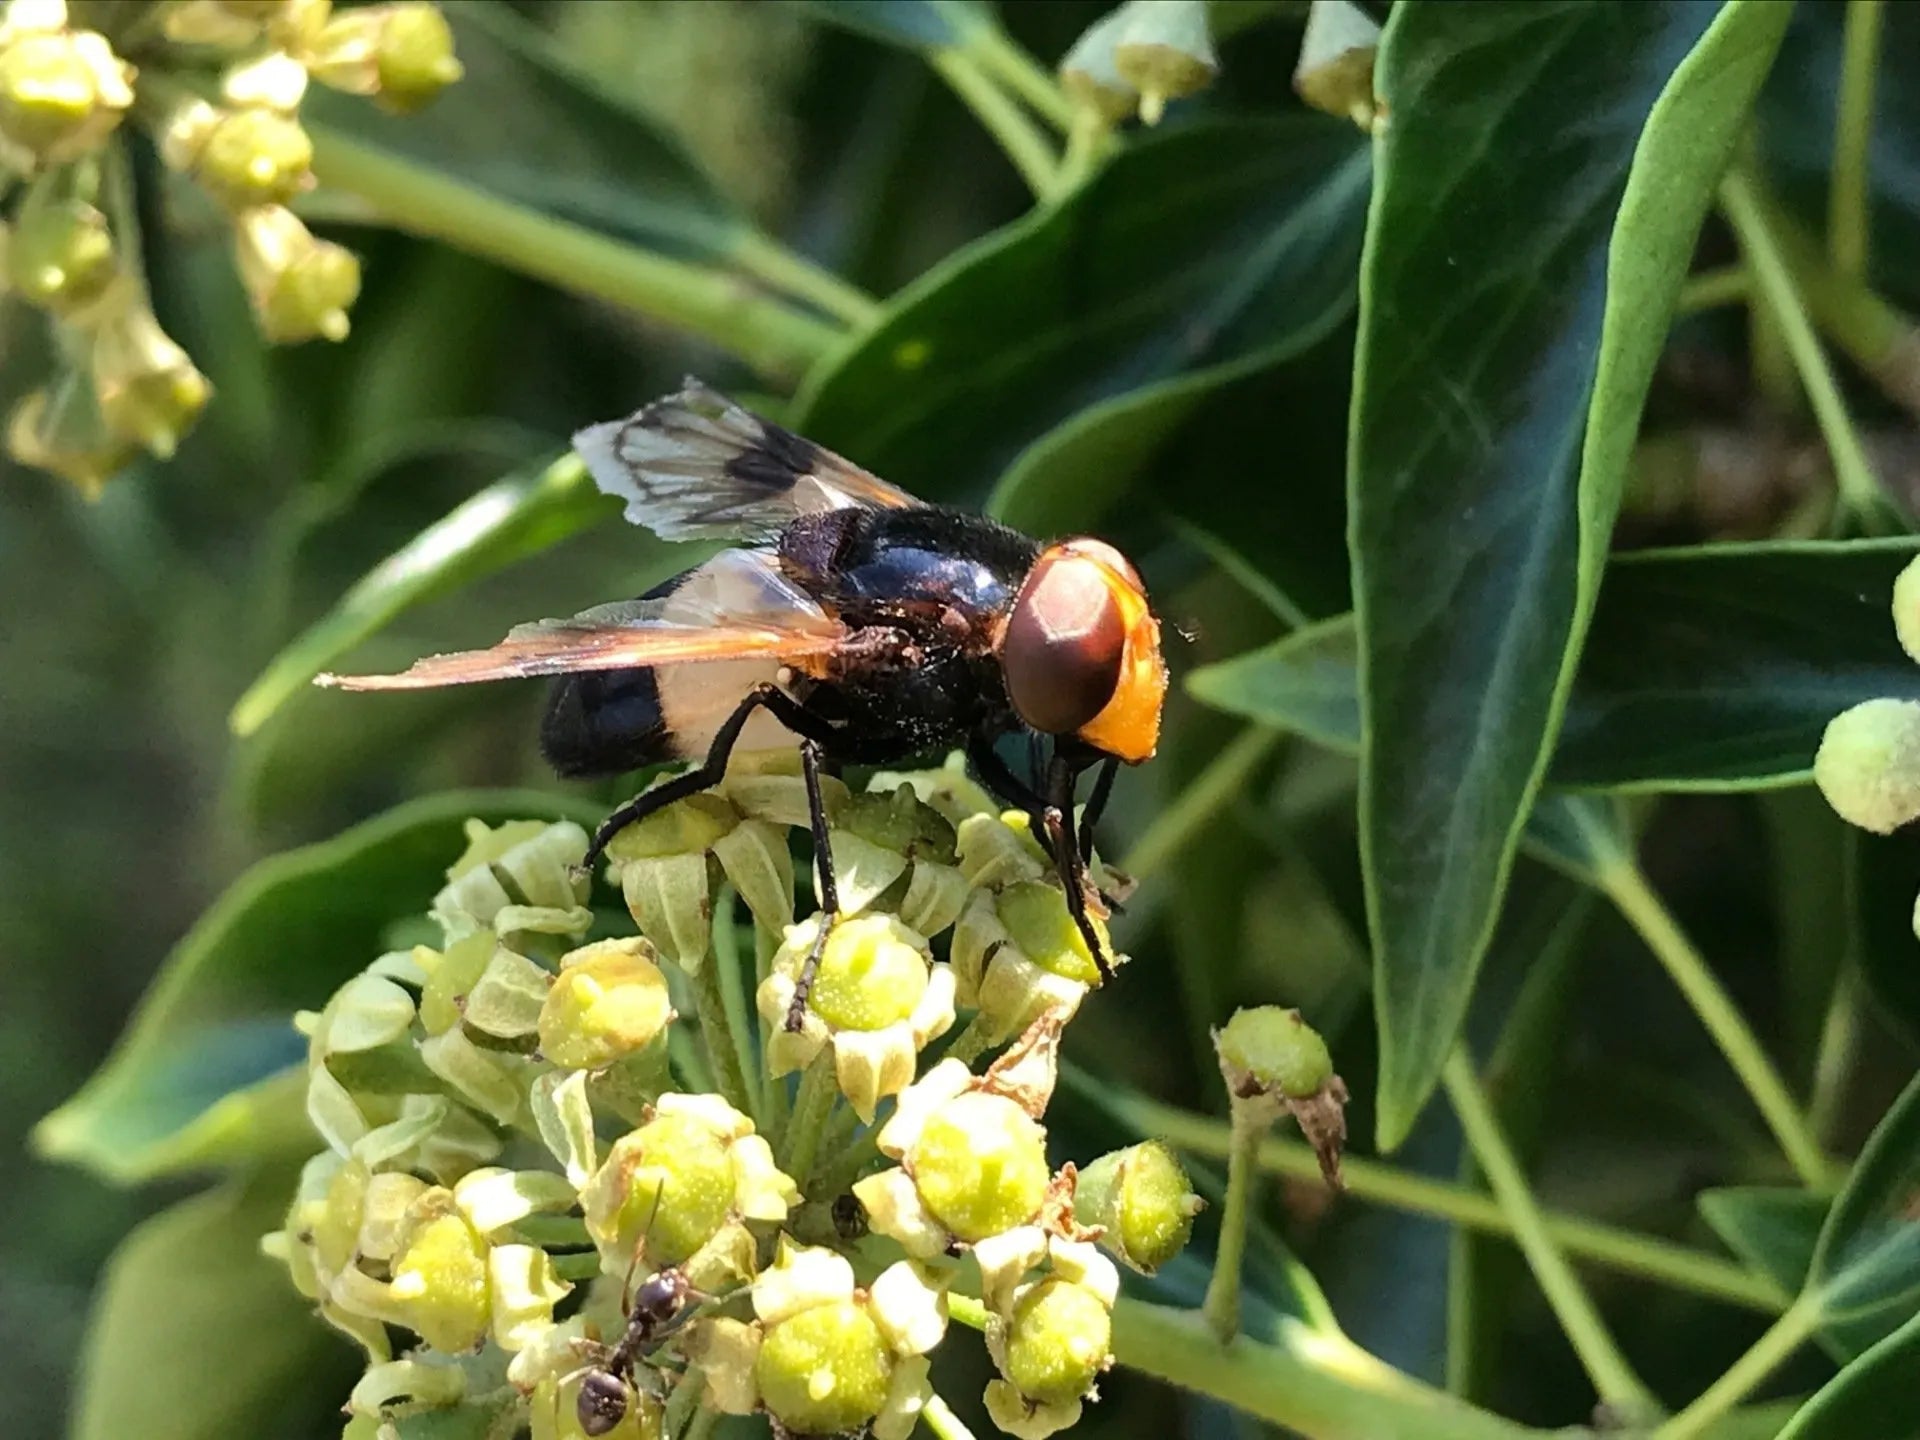 Wild ivy is a really important plant for pollinators like this hoverfly (Volucella pellucens)